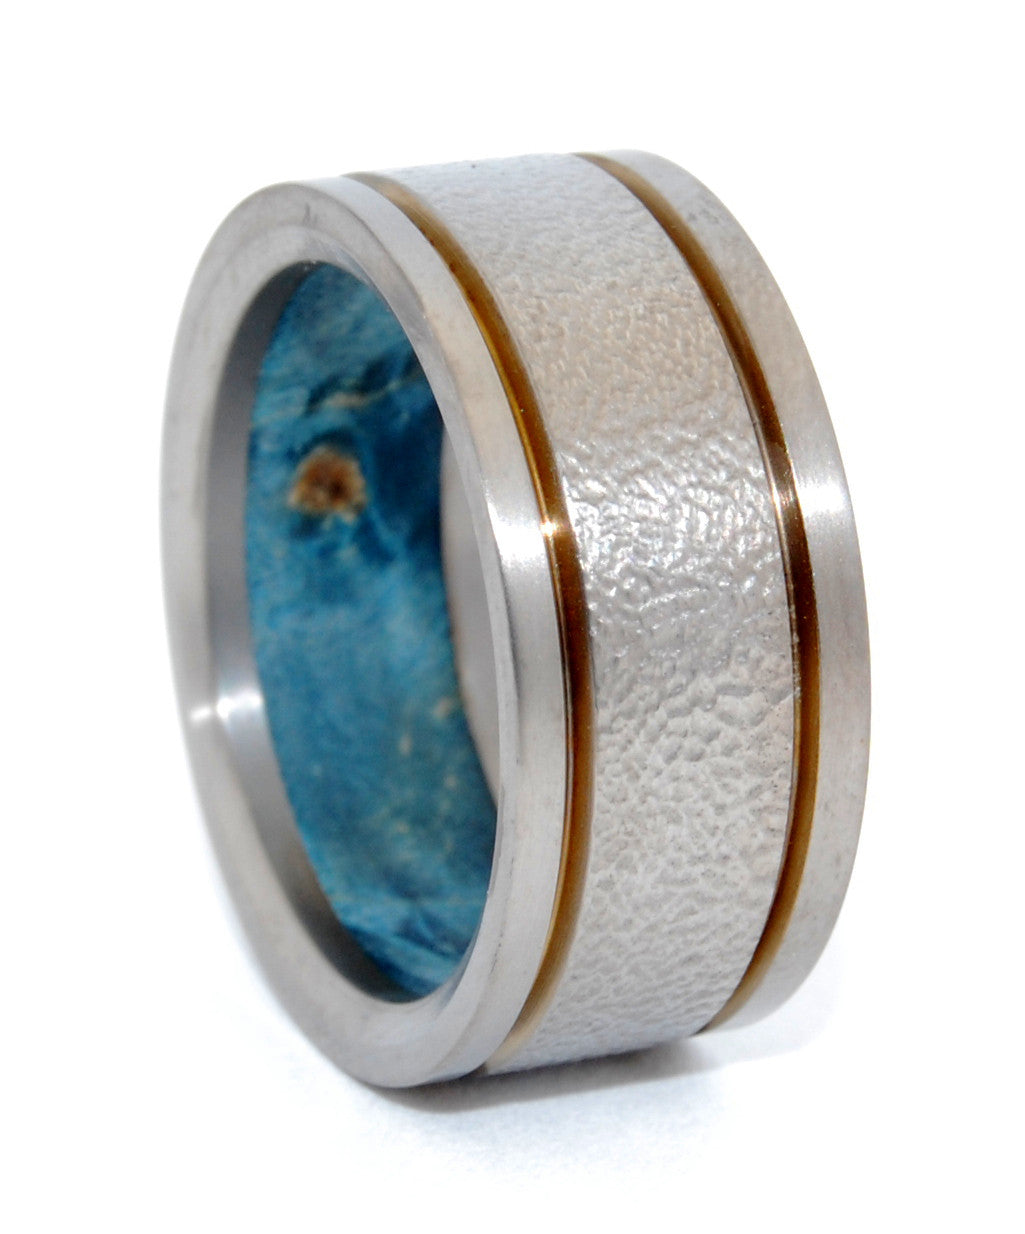 Titan | Handcrafted Titanium and Wood Wedding Ring - Minter and Richter Designs